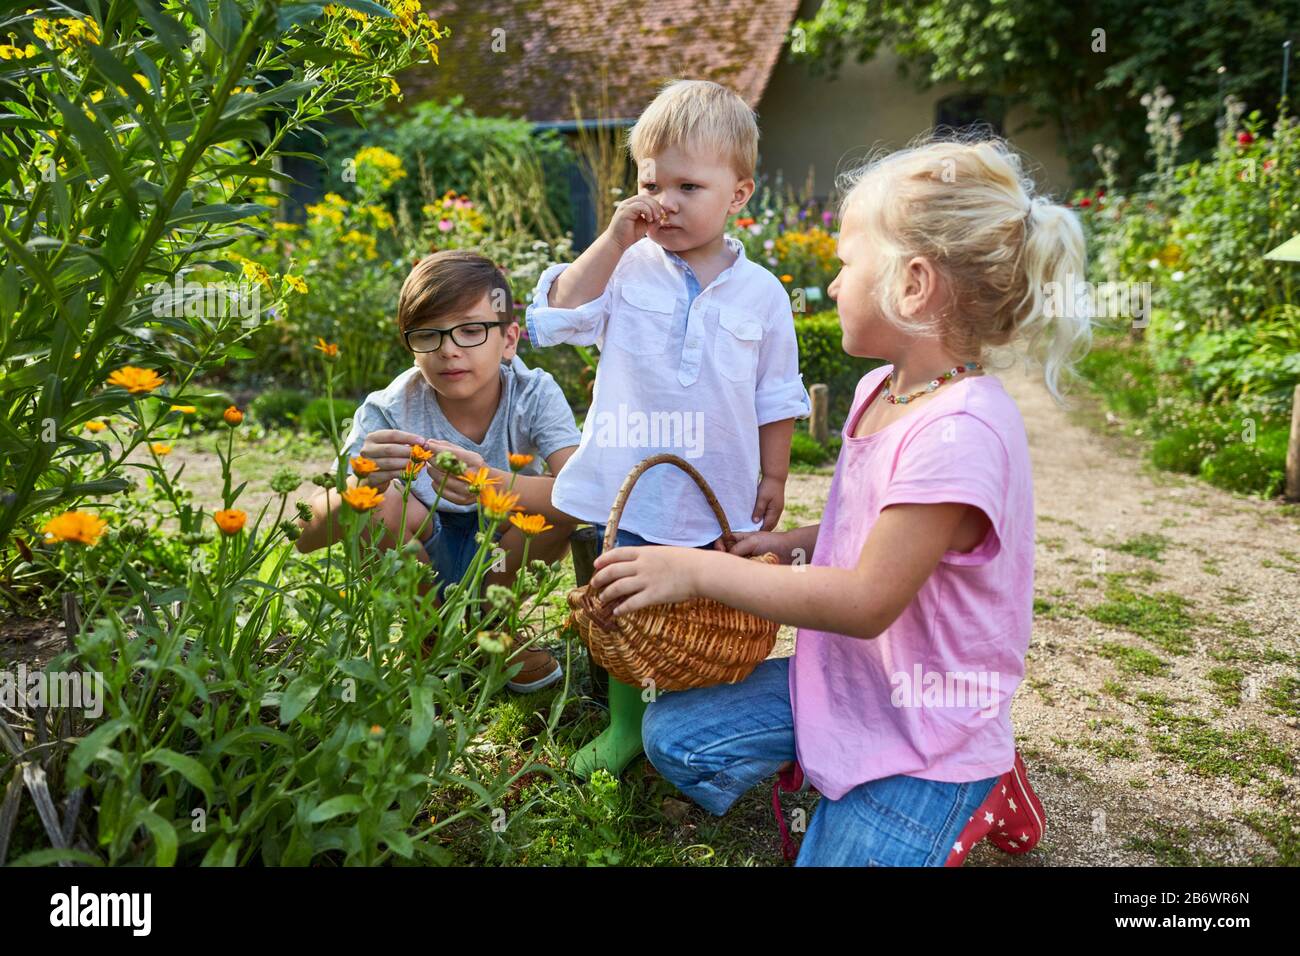 Children investigating food. Series: Preparation of a herbal drink. Picking edible flowers. Learning according to the Reggio Pedagogy principle, playful understanding and discovery. Germany. Stock Photo